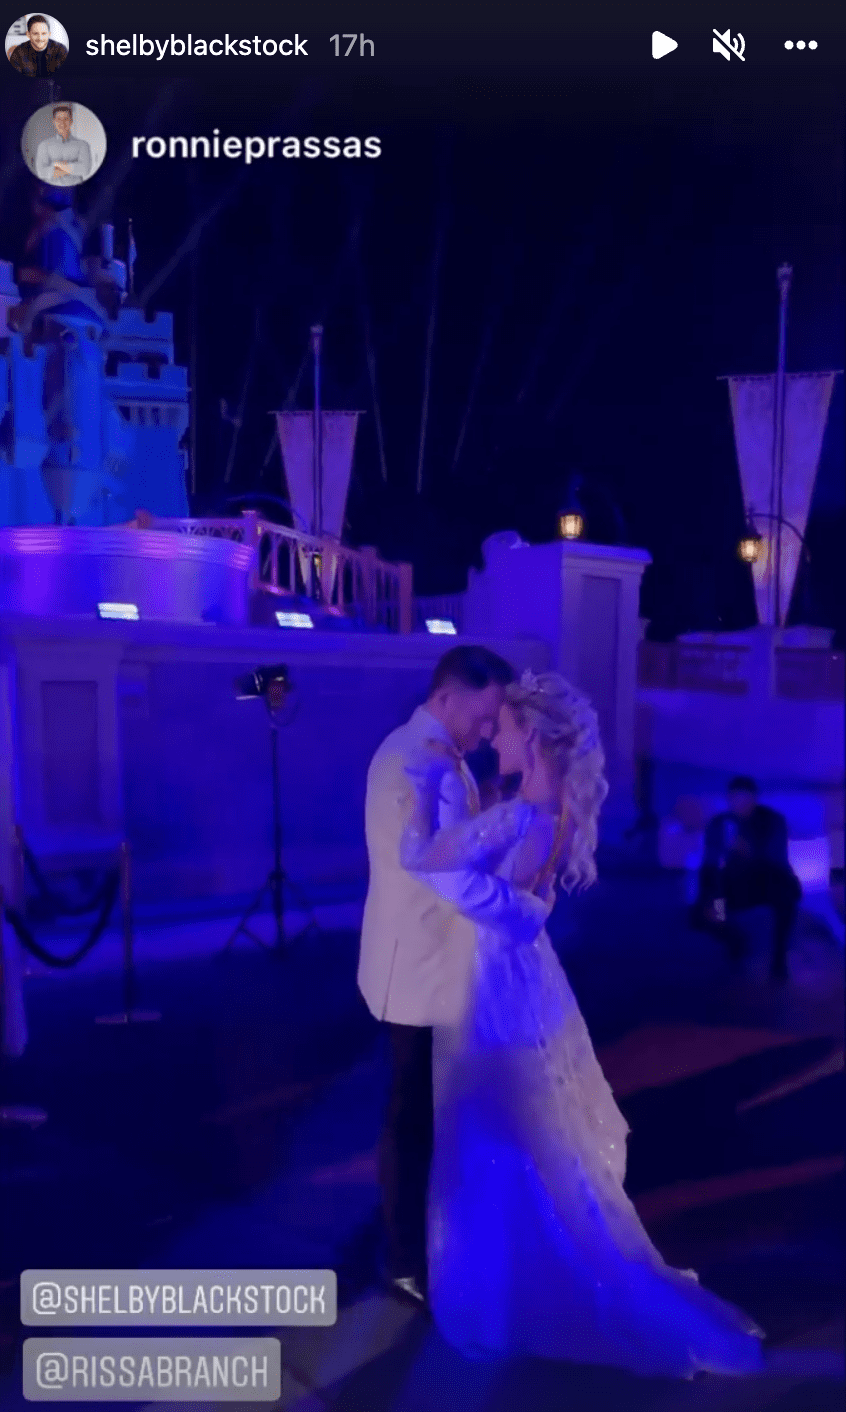 Shelby Blackstock dancing with his wife, Marissa Branch, during their wedding at Walt Disney World on February 12, 2022. | Source: Instagram.com/Shelbyblackstock